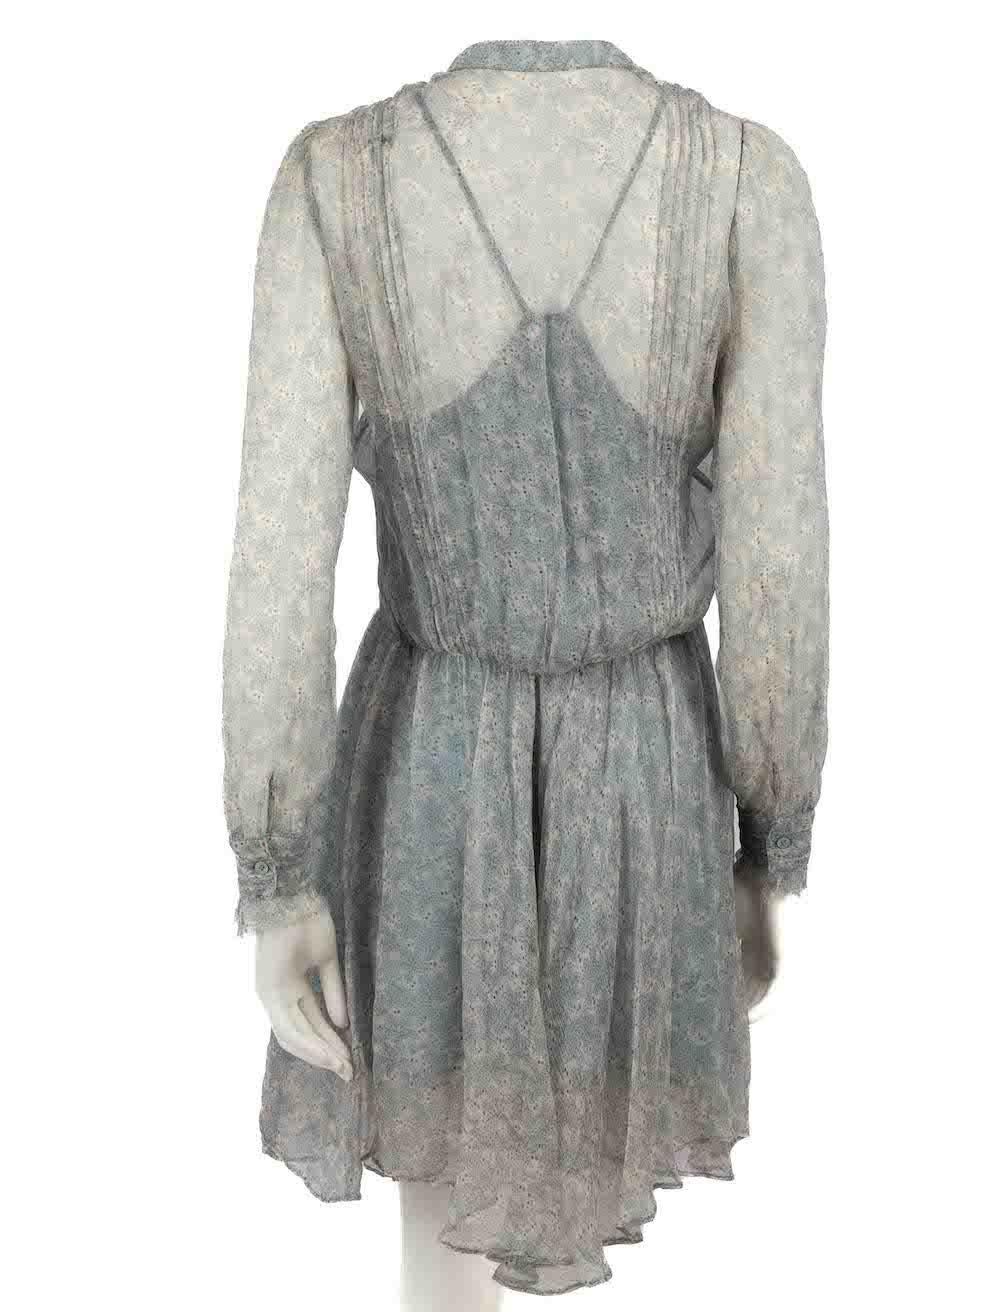 Zadig & Voltaire Dotted Silk Sheer Mini Dress Size S In Good Condition For Sale In London, GB